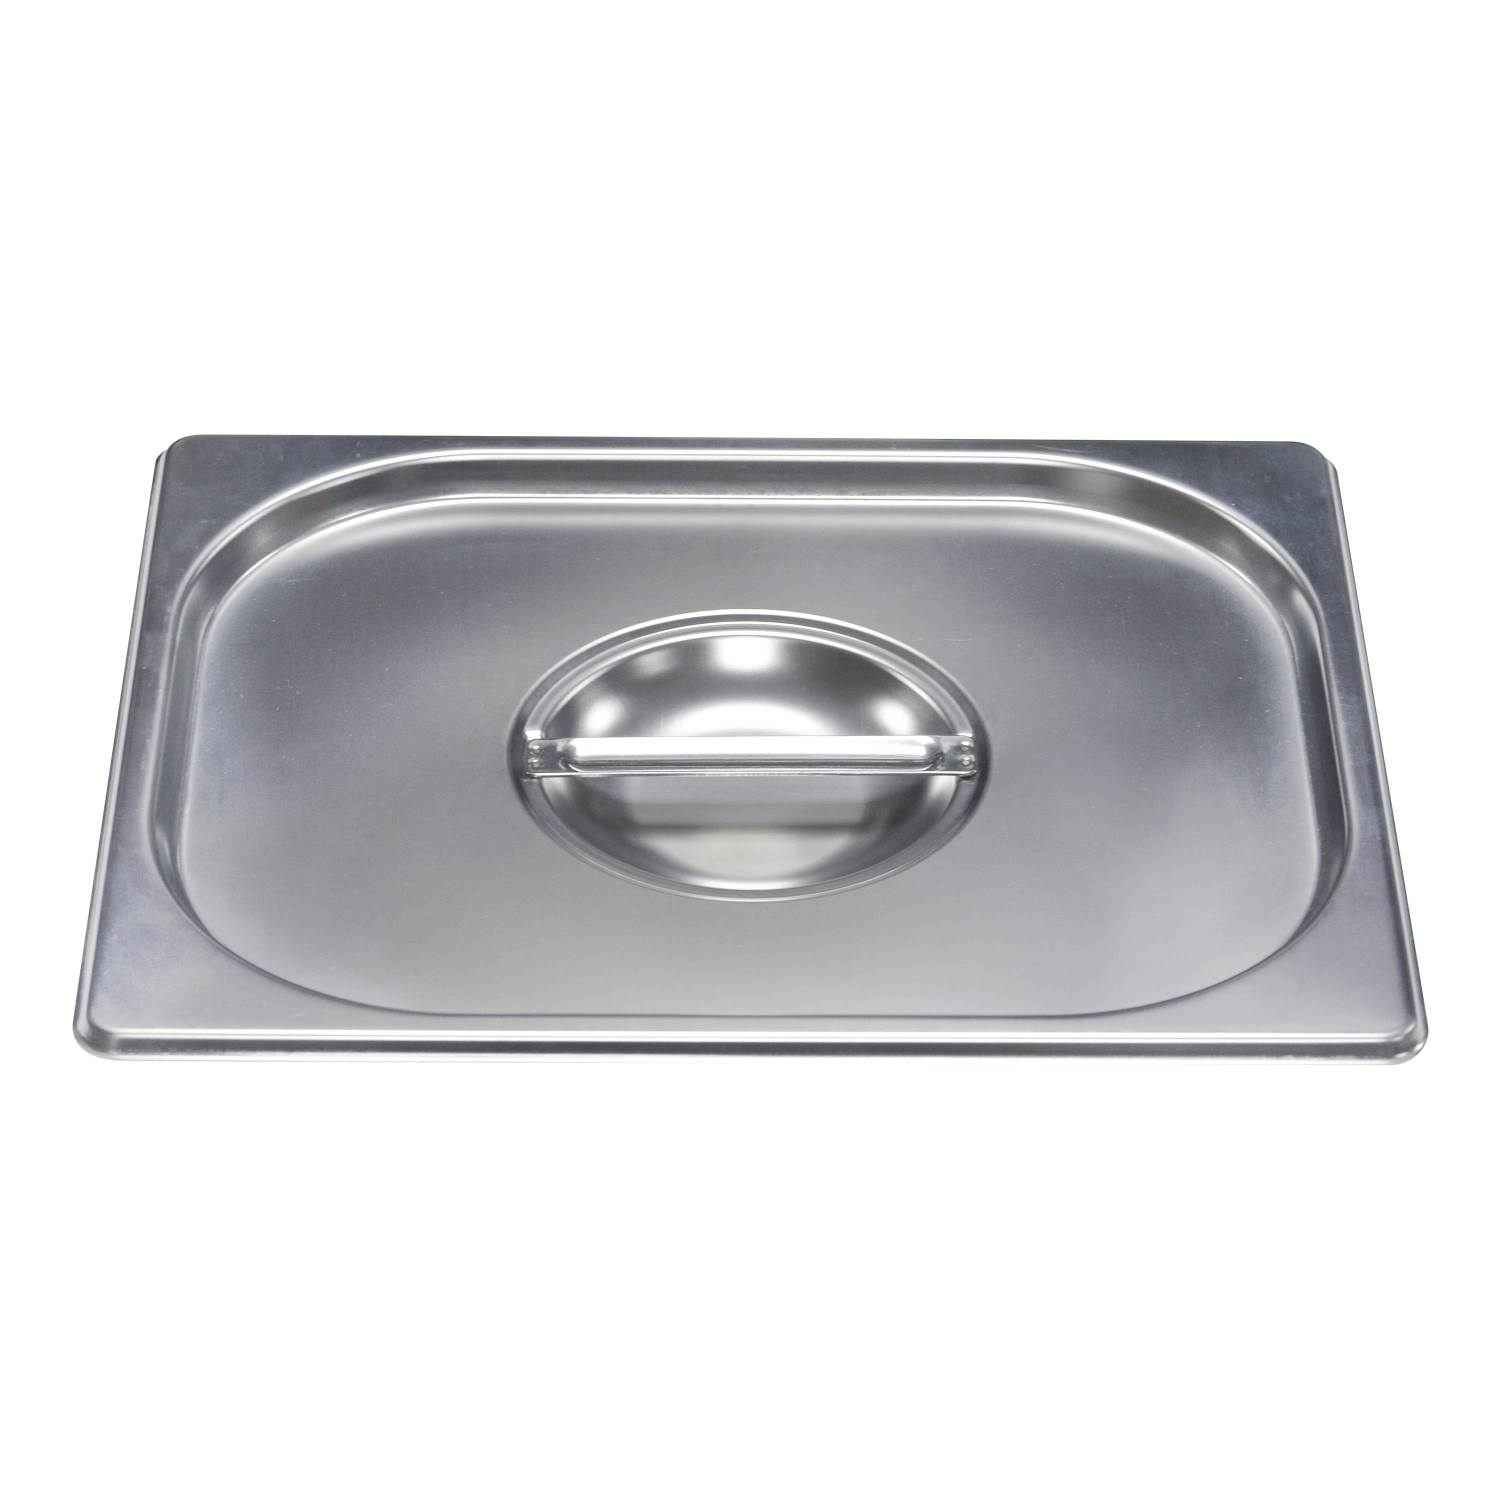 Raj Steel Gastronorm Pan Gn Pan Cover